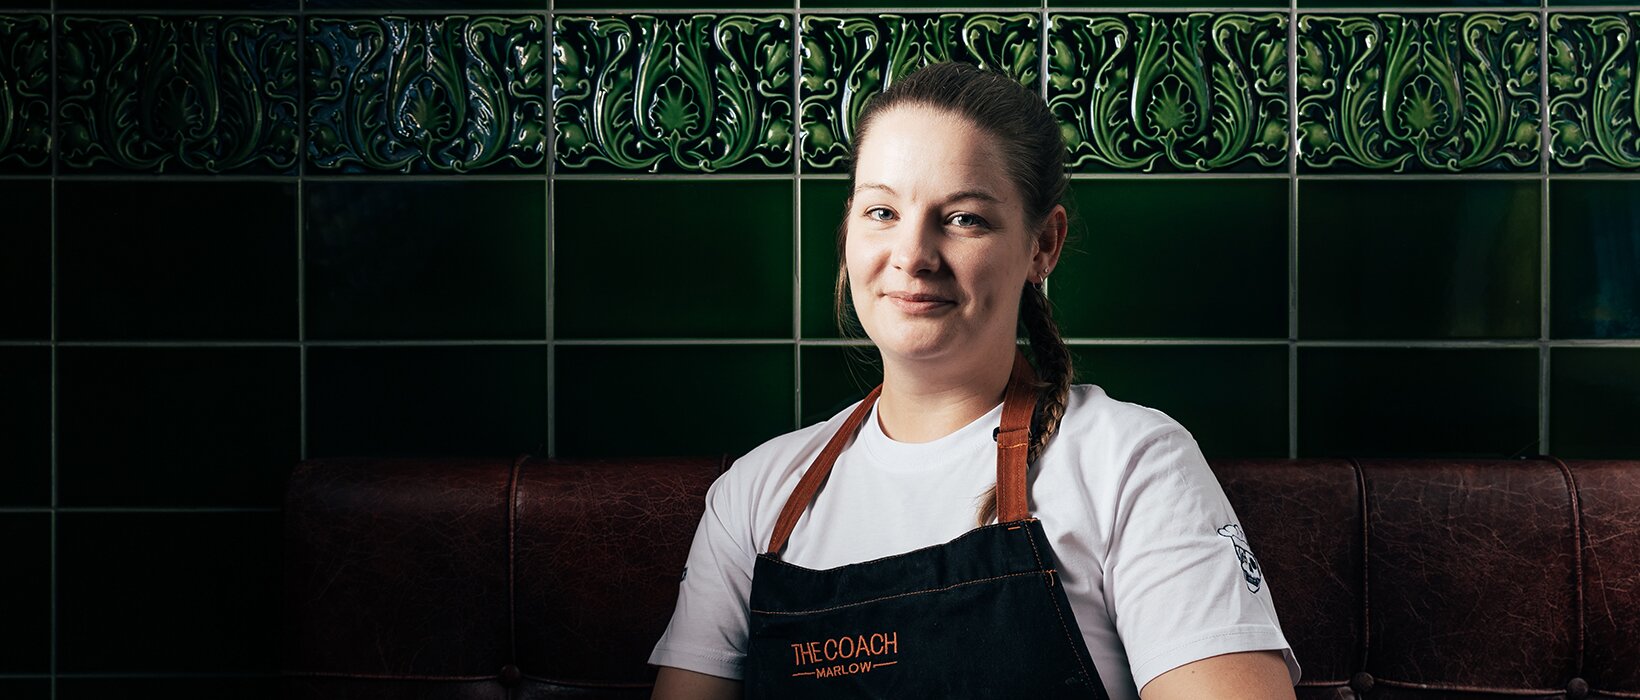 Sarah Hayward is still on cloud nine after her Michelin win